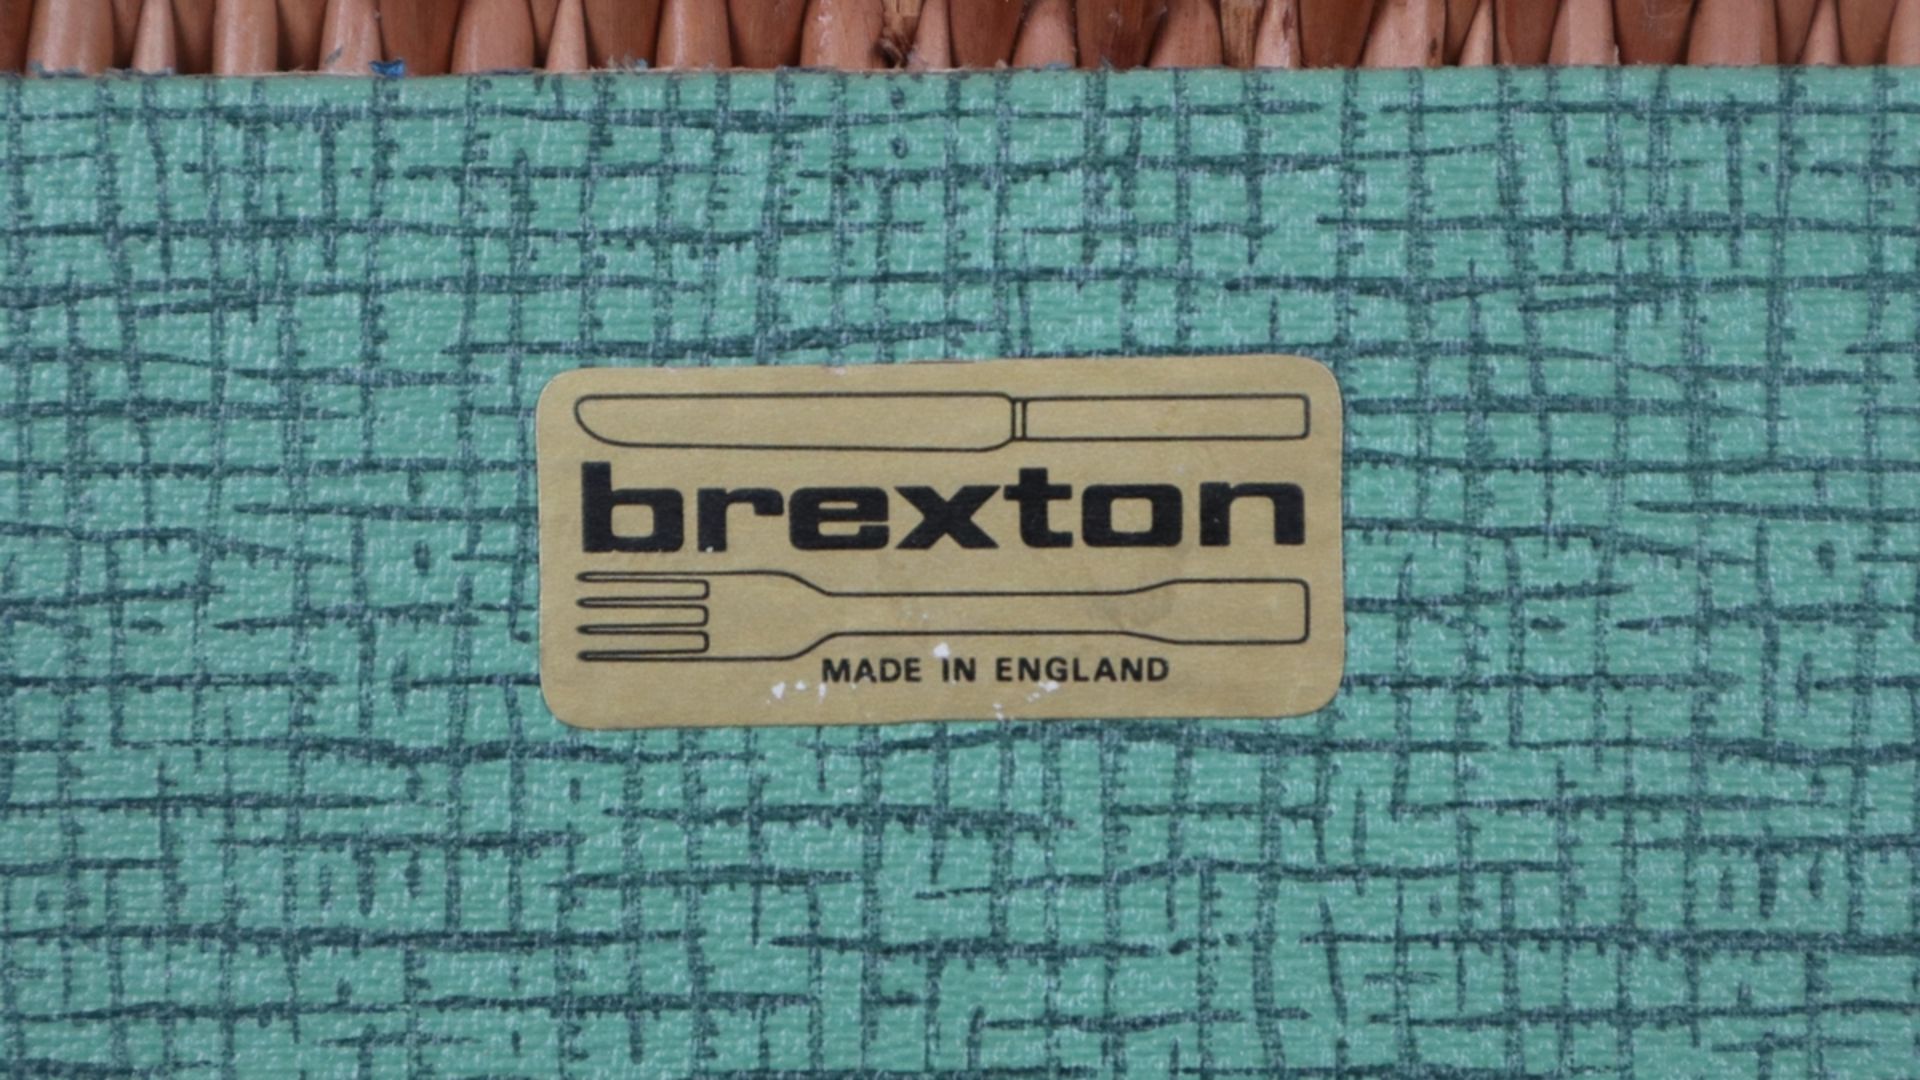 Brexton wicker picnic hamper with contents - Image 4 of 4